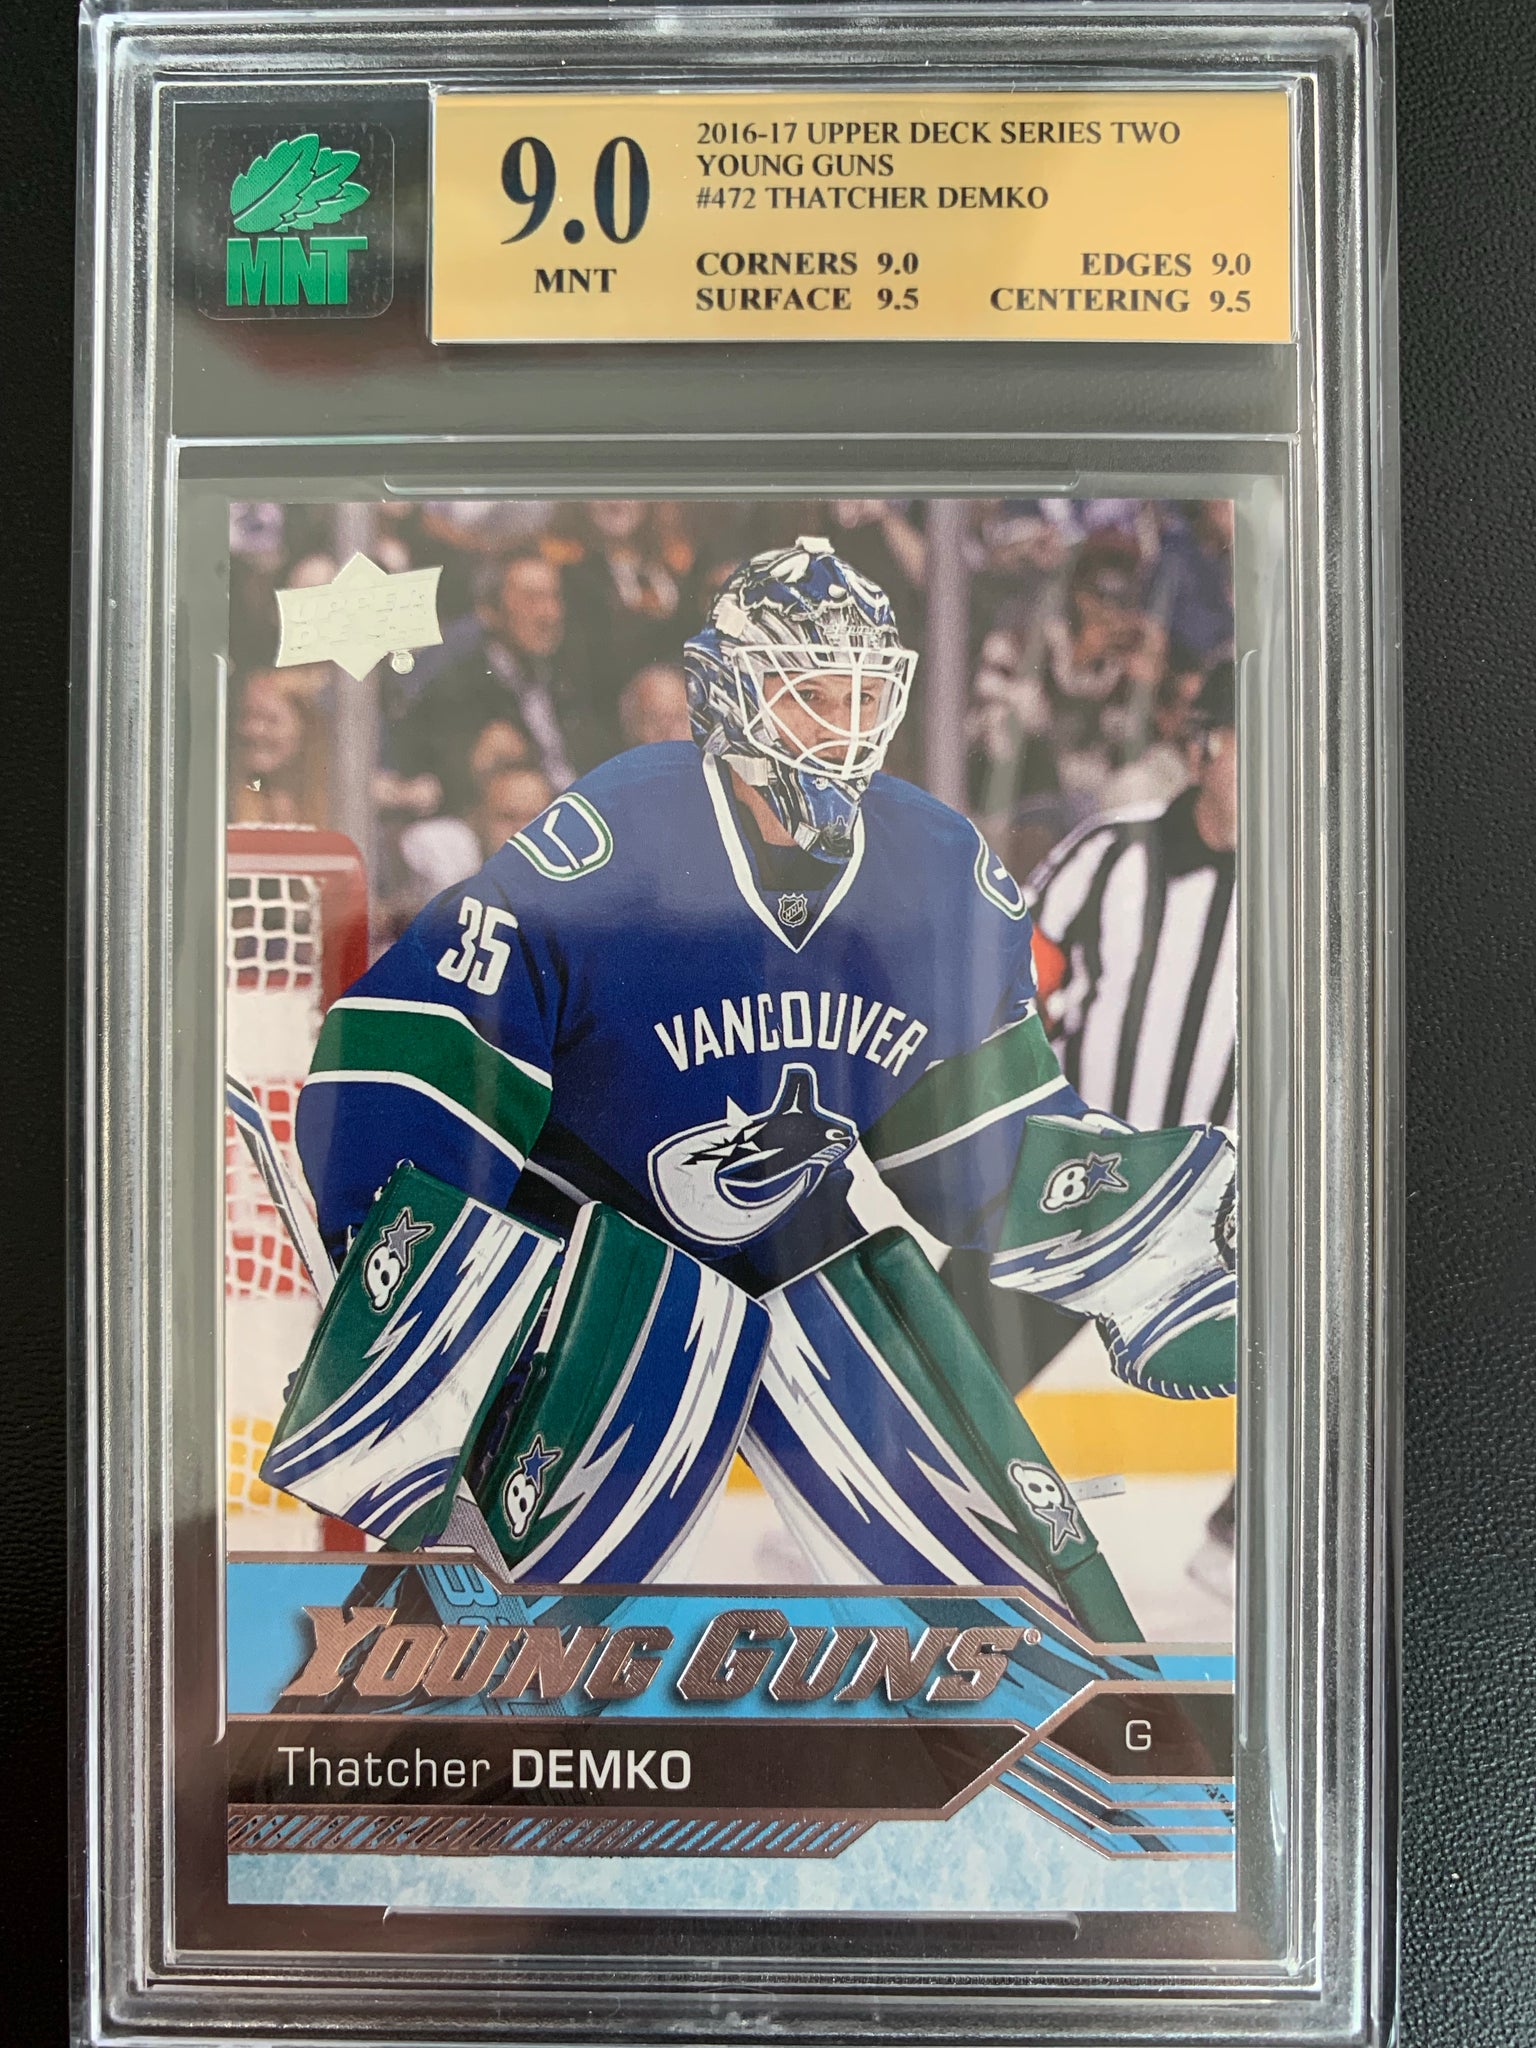 2016-17 UPPER DECK HOCKEY #472 VANCOUVER CANUCKS - THATCHER DEMKO YOUNG GUNS ROOKIE CARD GRADED MNT 9.0 MINT